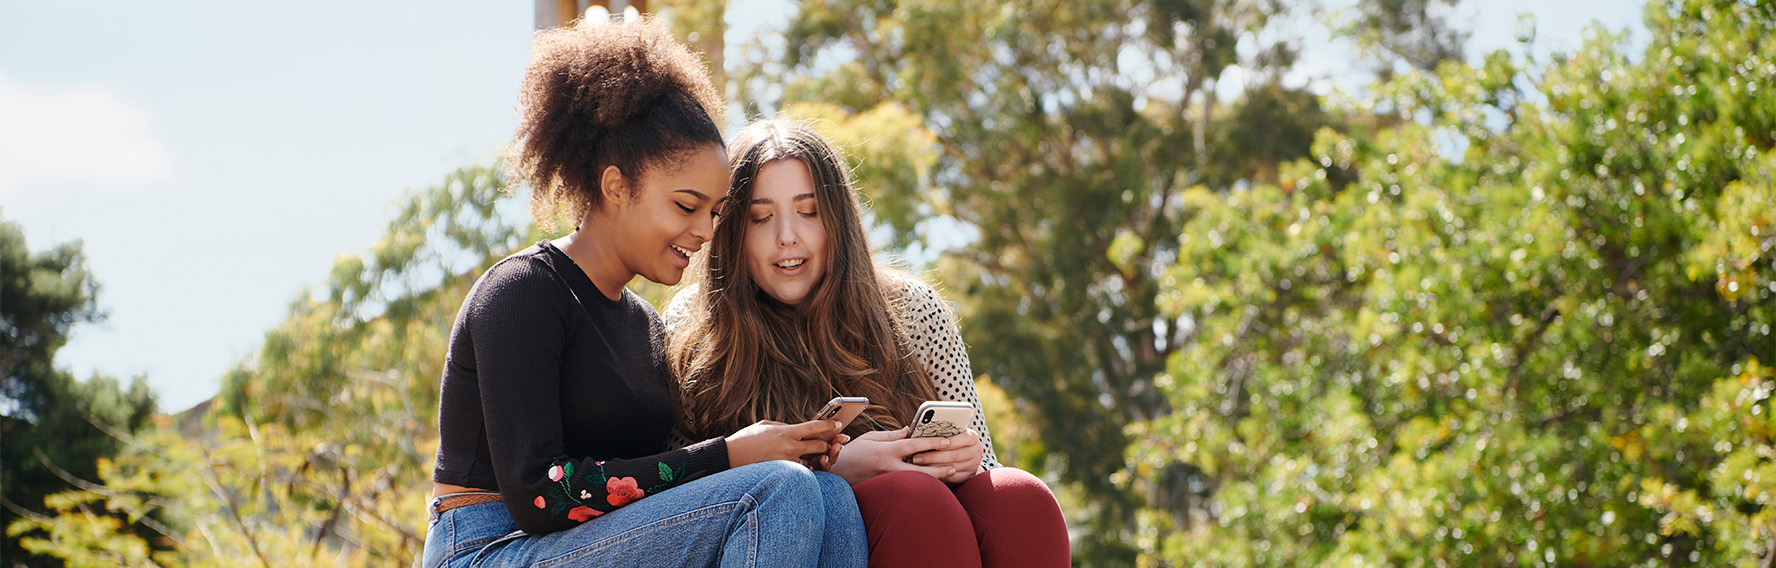 Two young women sitting on a wall looking at a mobile phone